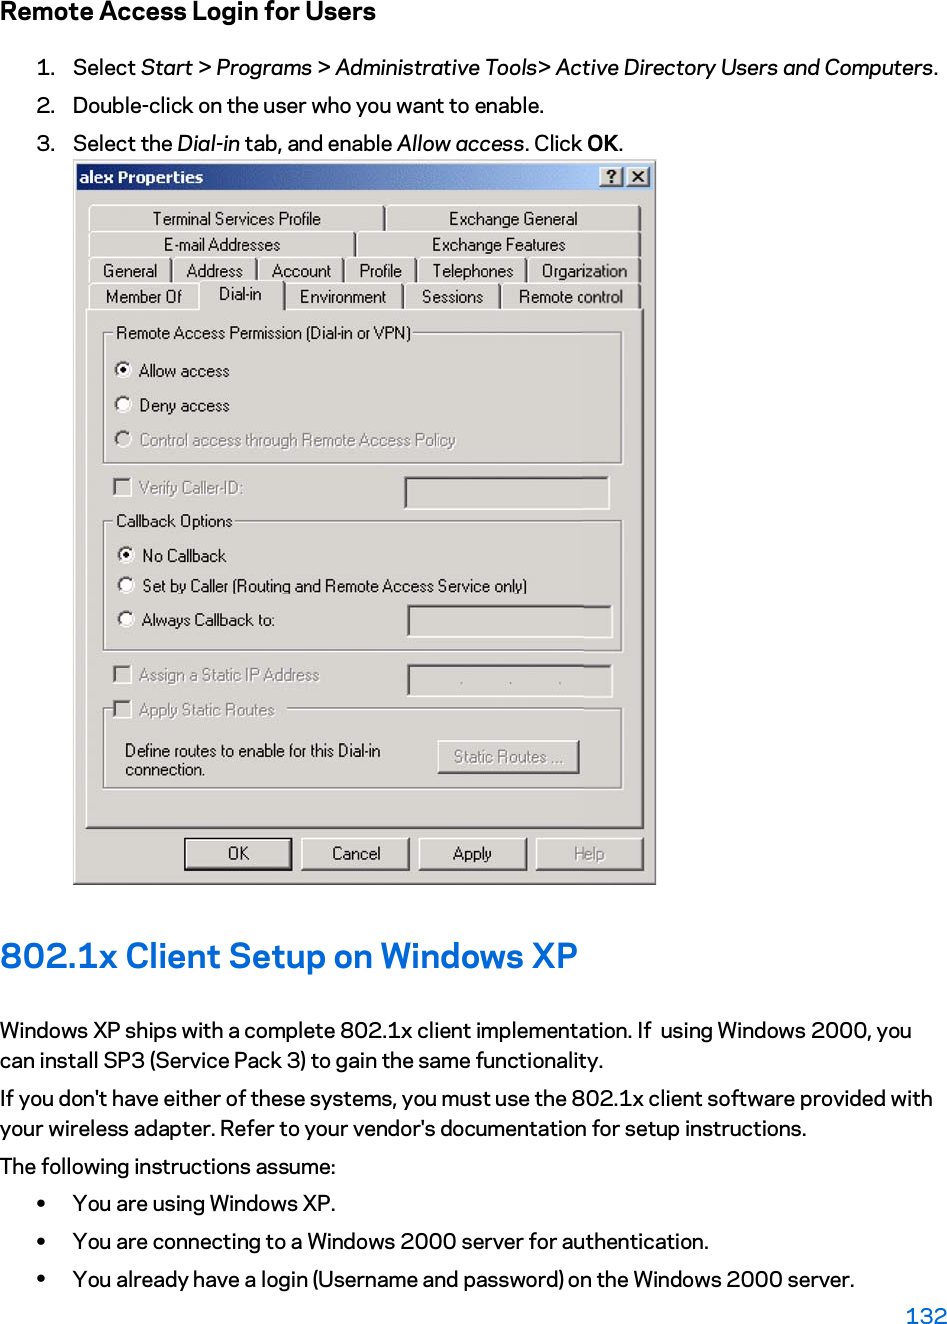 Remote Access Login for Users 1. Select Start &gt; Programs &gt; Administrative Tools&gt; Active Directory Users and Computers.  2. Double-click on the user who you want to enable. 3. Select the Dial-in tab, and enable Allow access. Click OK.  802.1x Client Setup on Windows XP Windows XP ships with a complete 802.1x client implementation. If  using Windows 2000, you can install SP3 (Service Pack 3) to gain the same functionality.  If you don&apos;t have either of these systems, you must use the 802.1x client software provided with your wireless adapter. Refer to your vendor&apos;s documentation for setup instructions. The following instructions assume: xYou are using Windows XP. xYou are connecting to a Windows 2000 server for authentication. xYou already have a login (Username and password) on the Windows 2000 server. 132